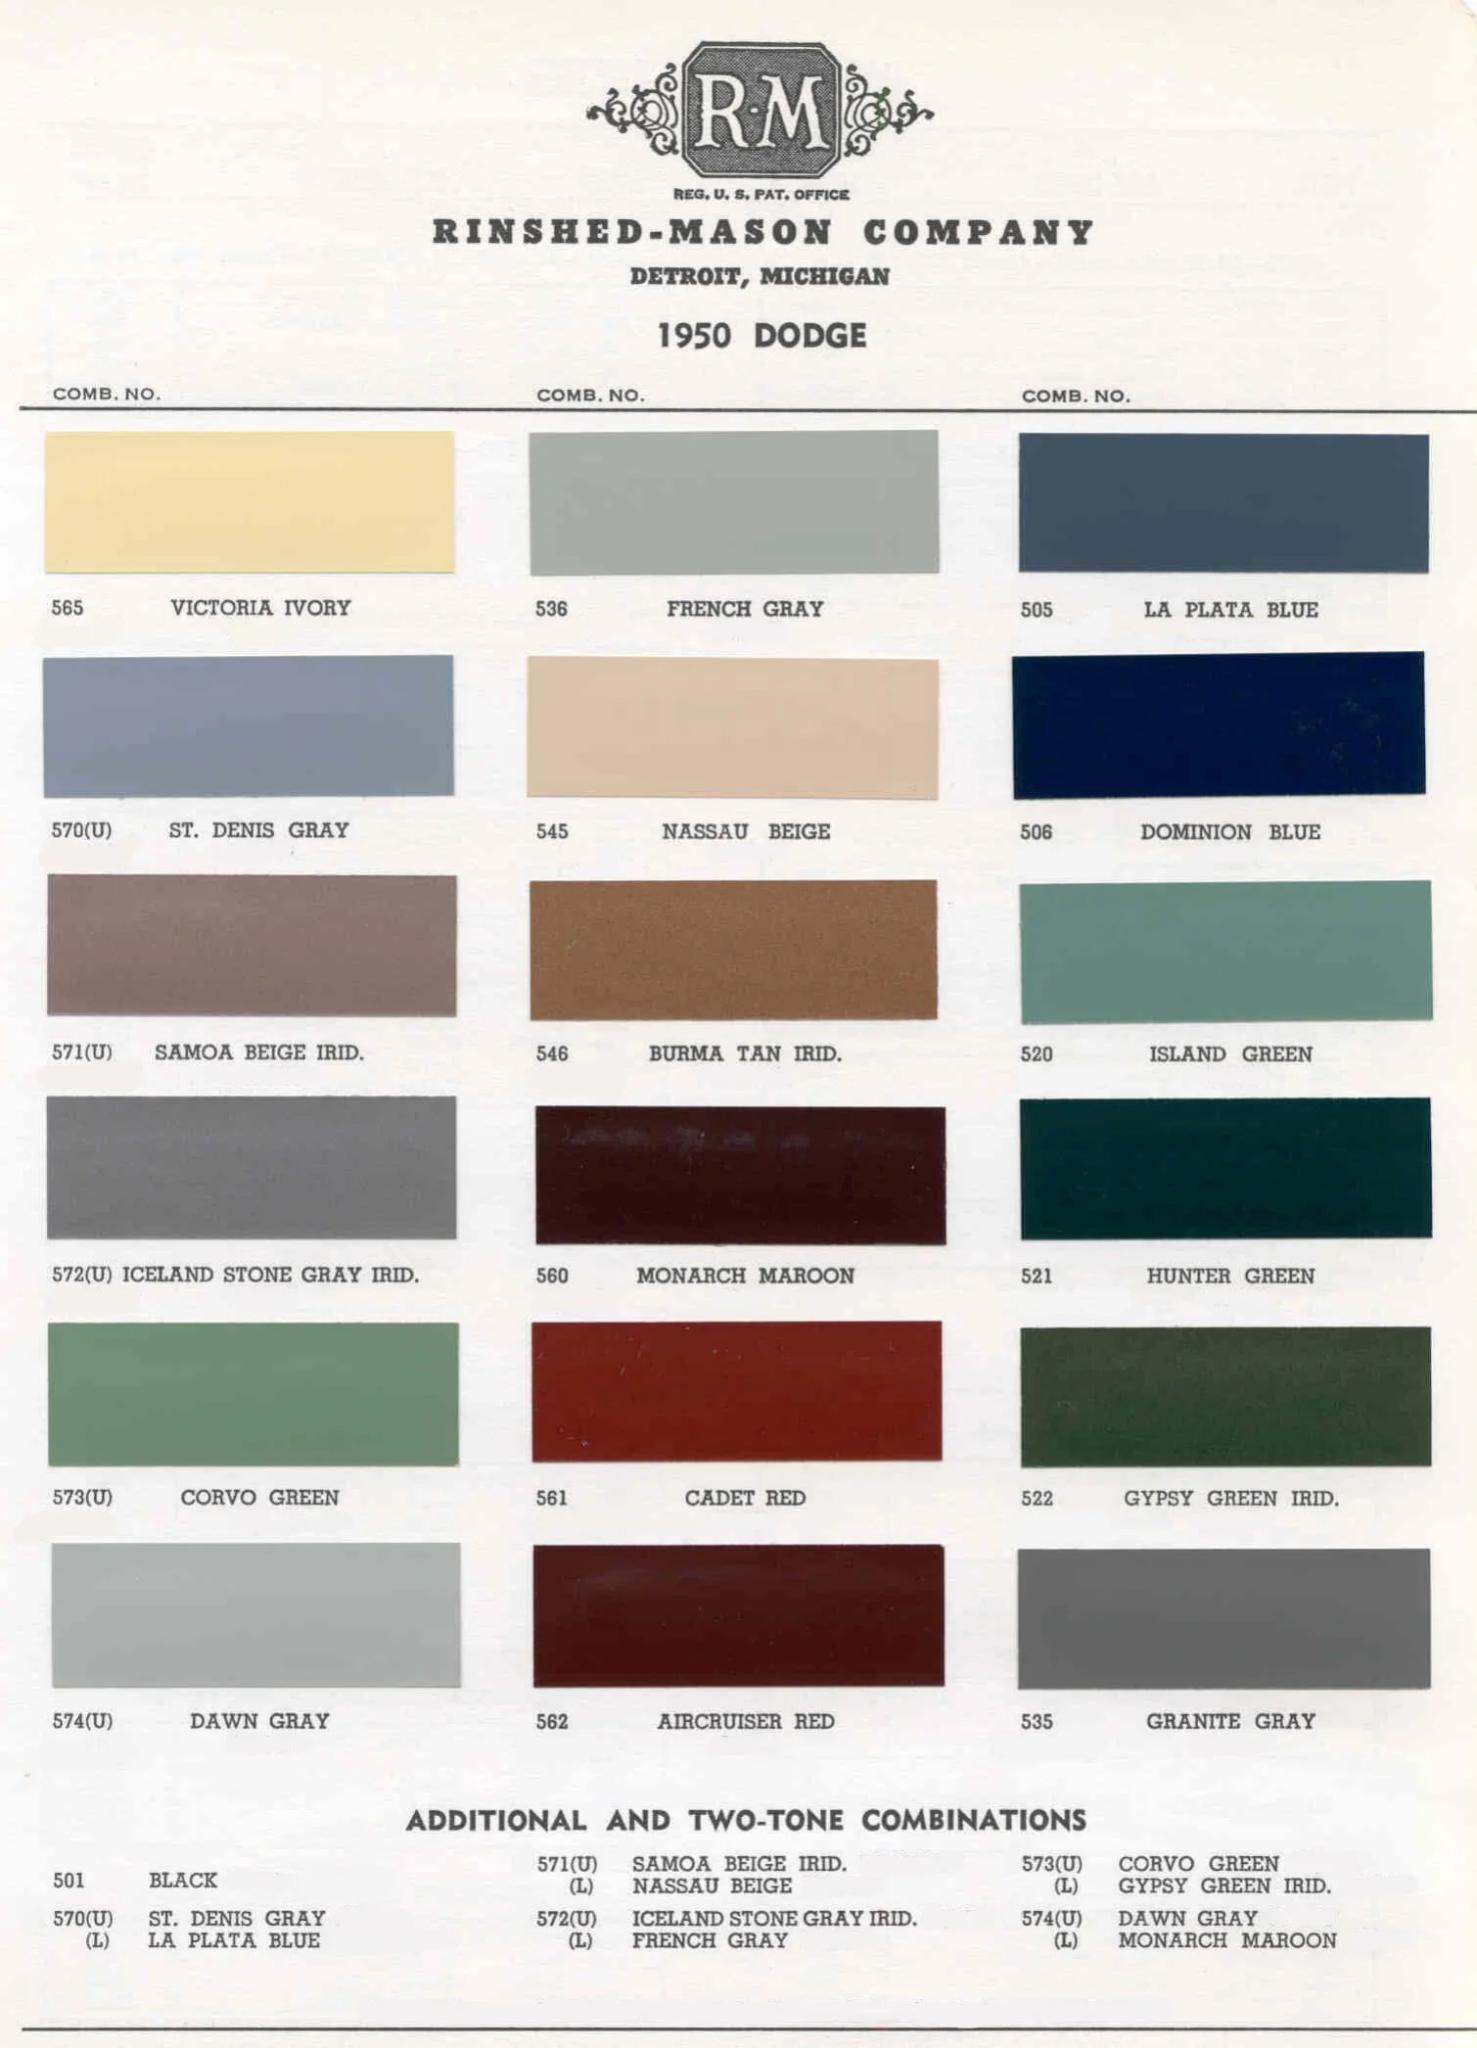 Summary Of Colors used on all Dodge Vehicles in 1950